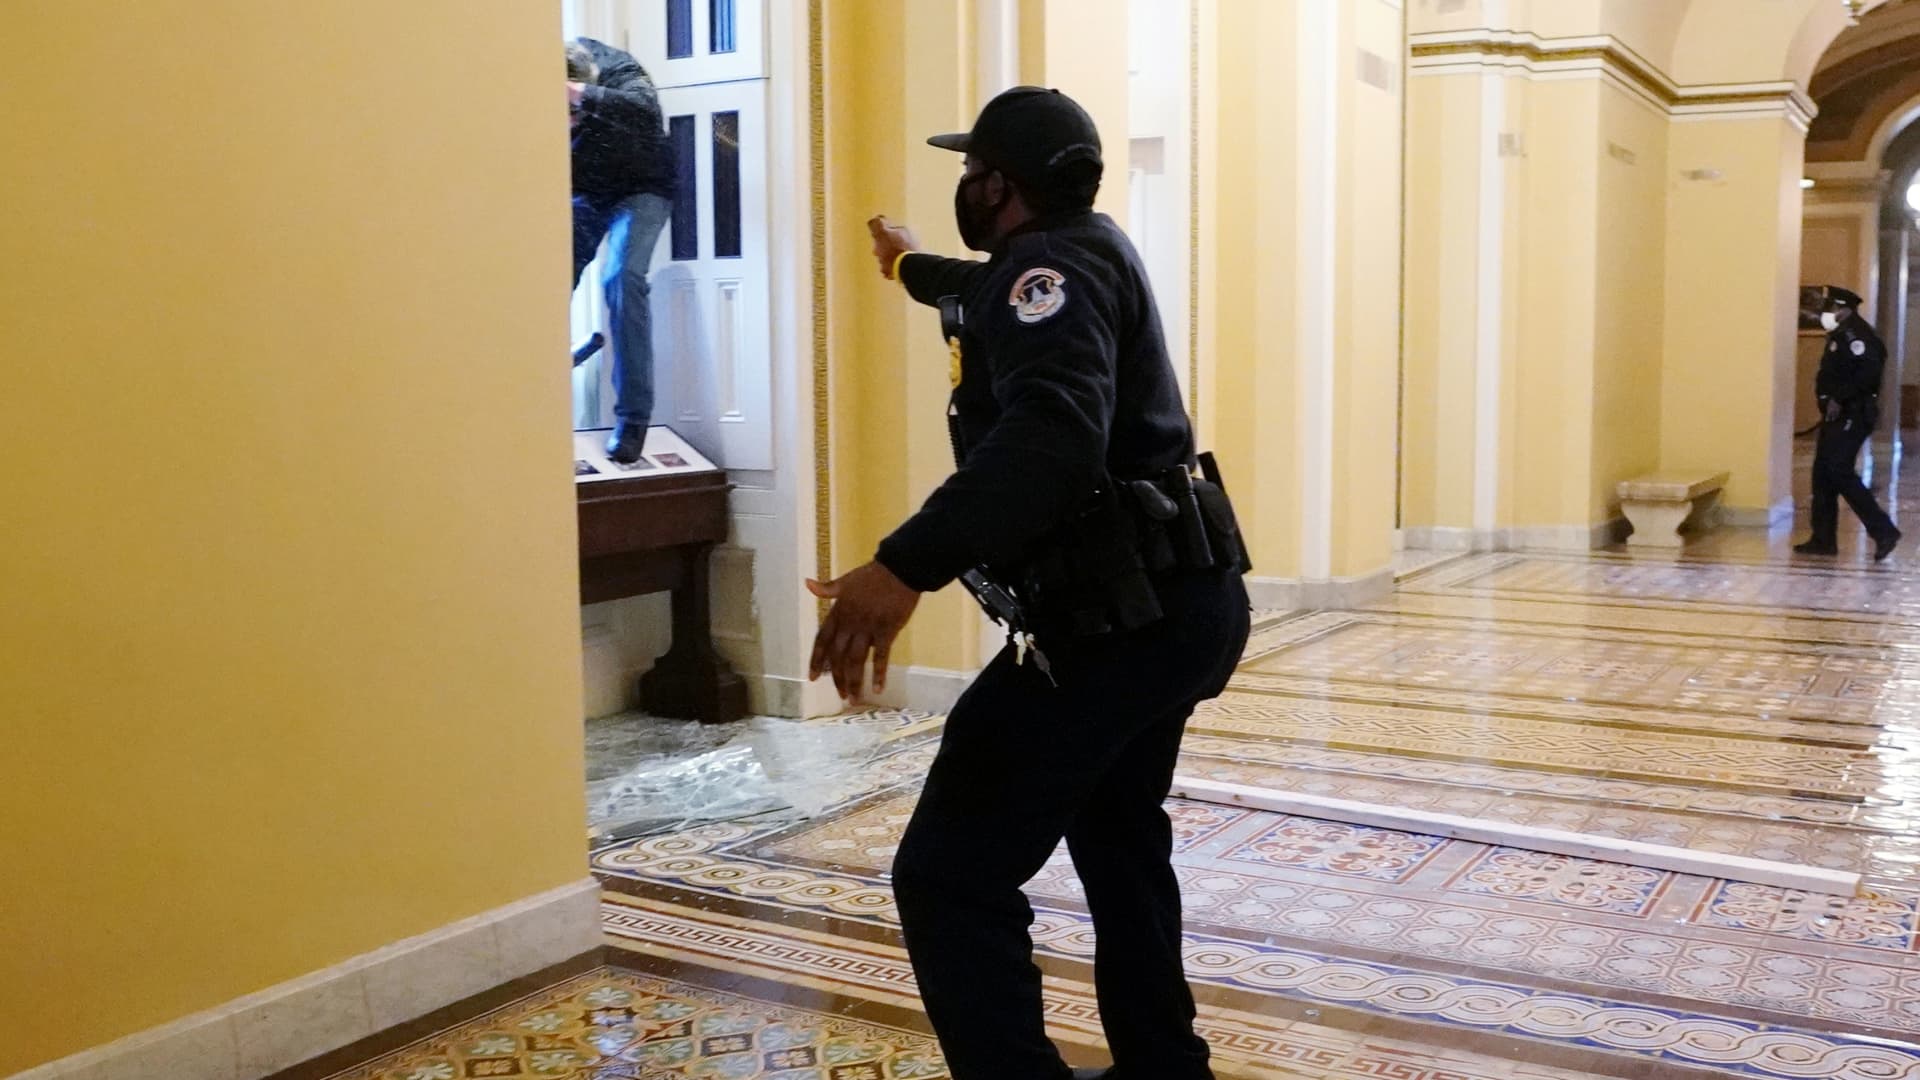 A U.S. Capitol police officer shoots pepper spray at a protestor attempting to enter the Capitol building during a joint session of Congress to certify the 2020 election results on Capitol Hill in Washington, January 6, 2021.